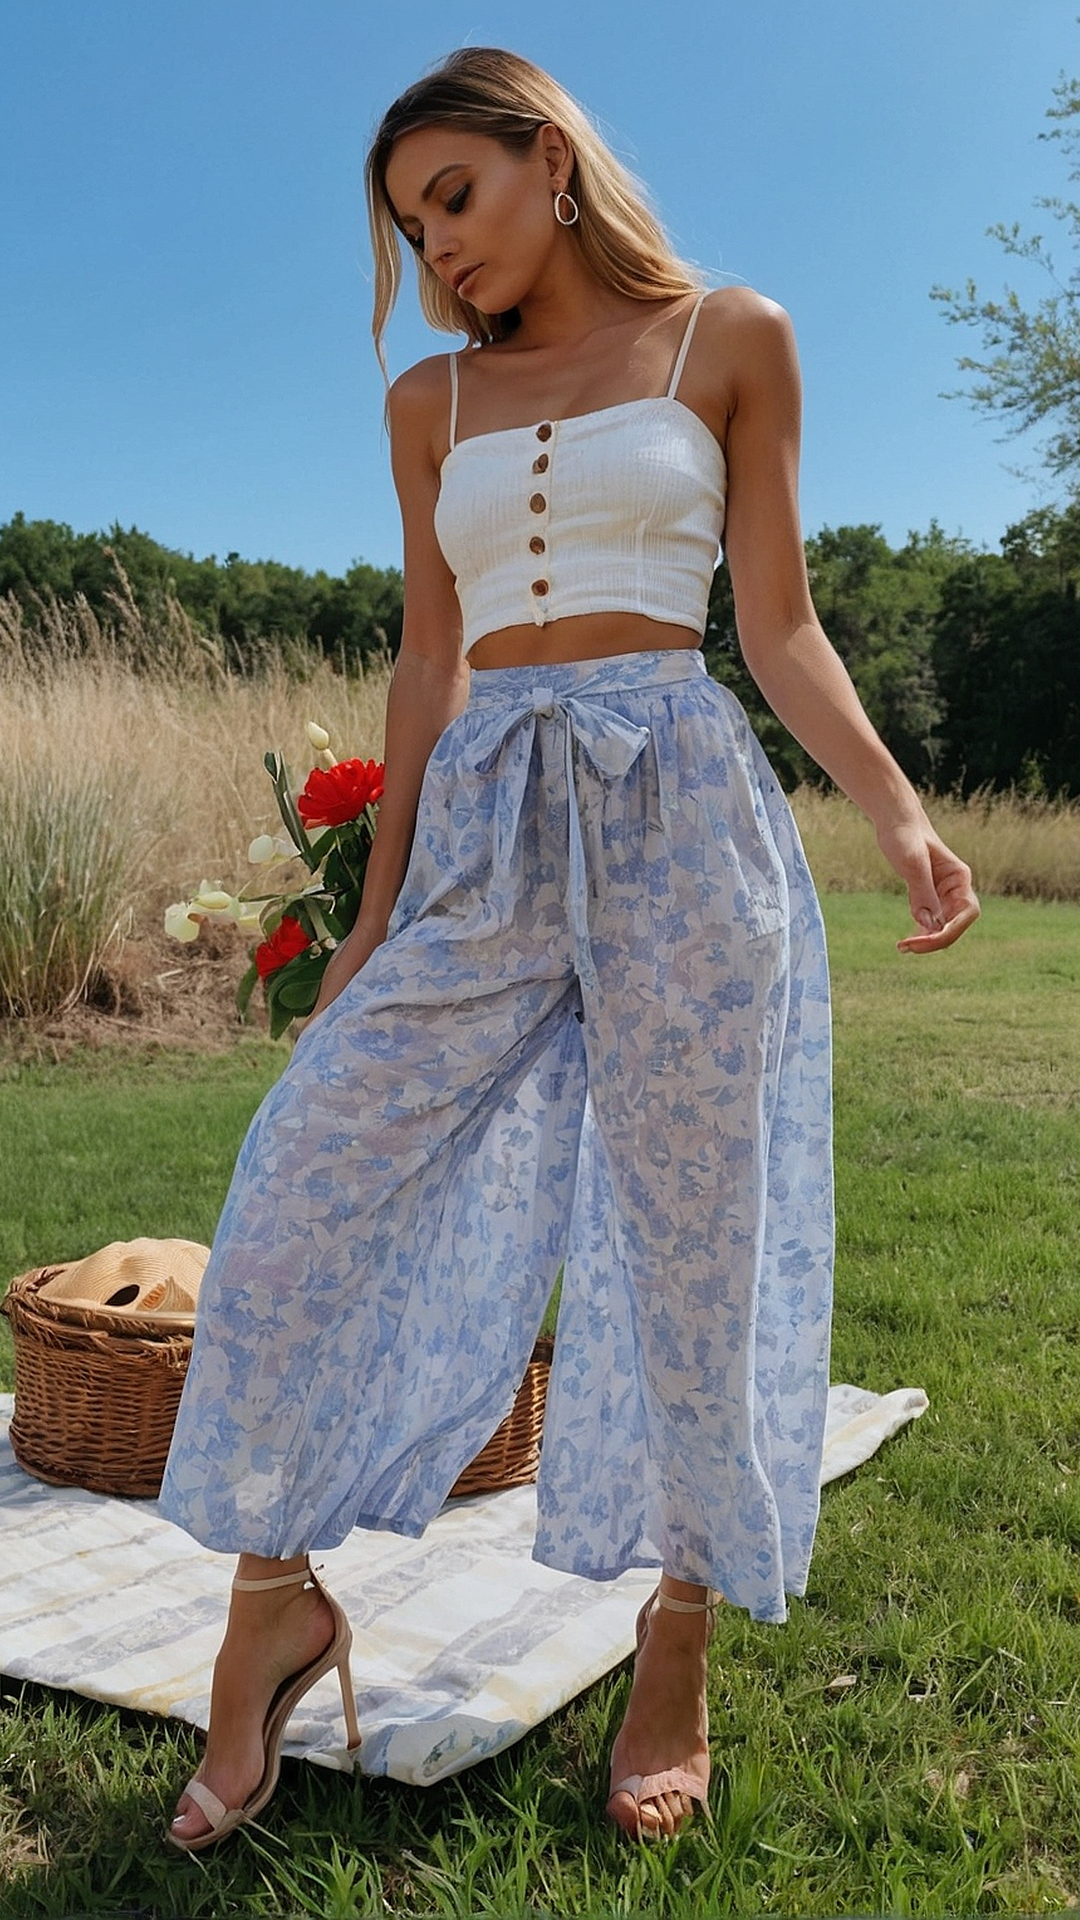 Fashion Forward: Women's Picnic Outfits with a Modern Twist